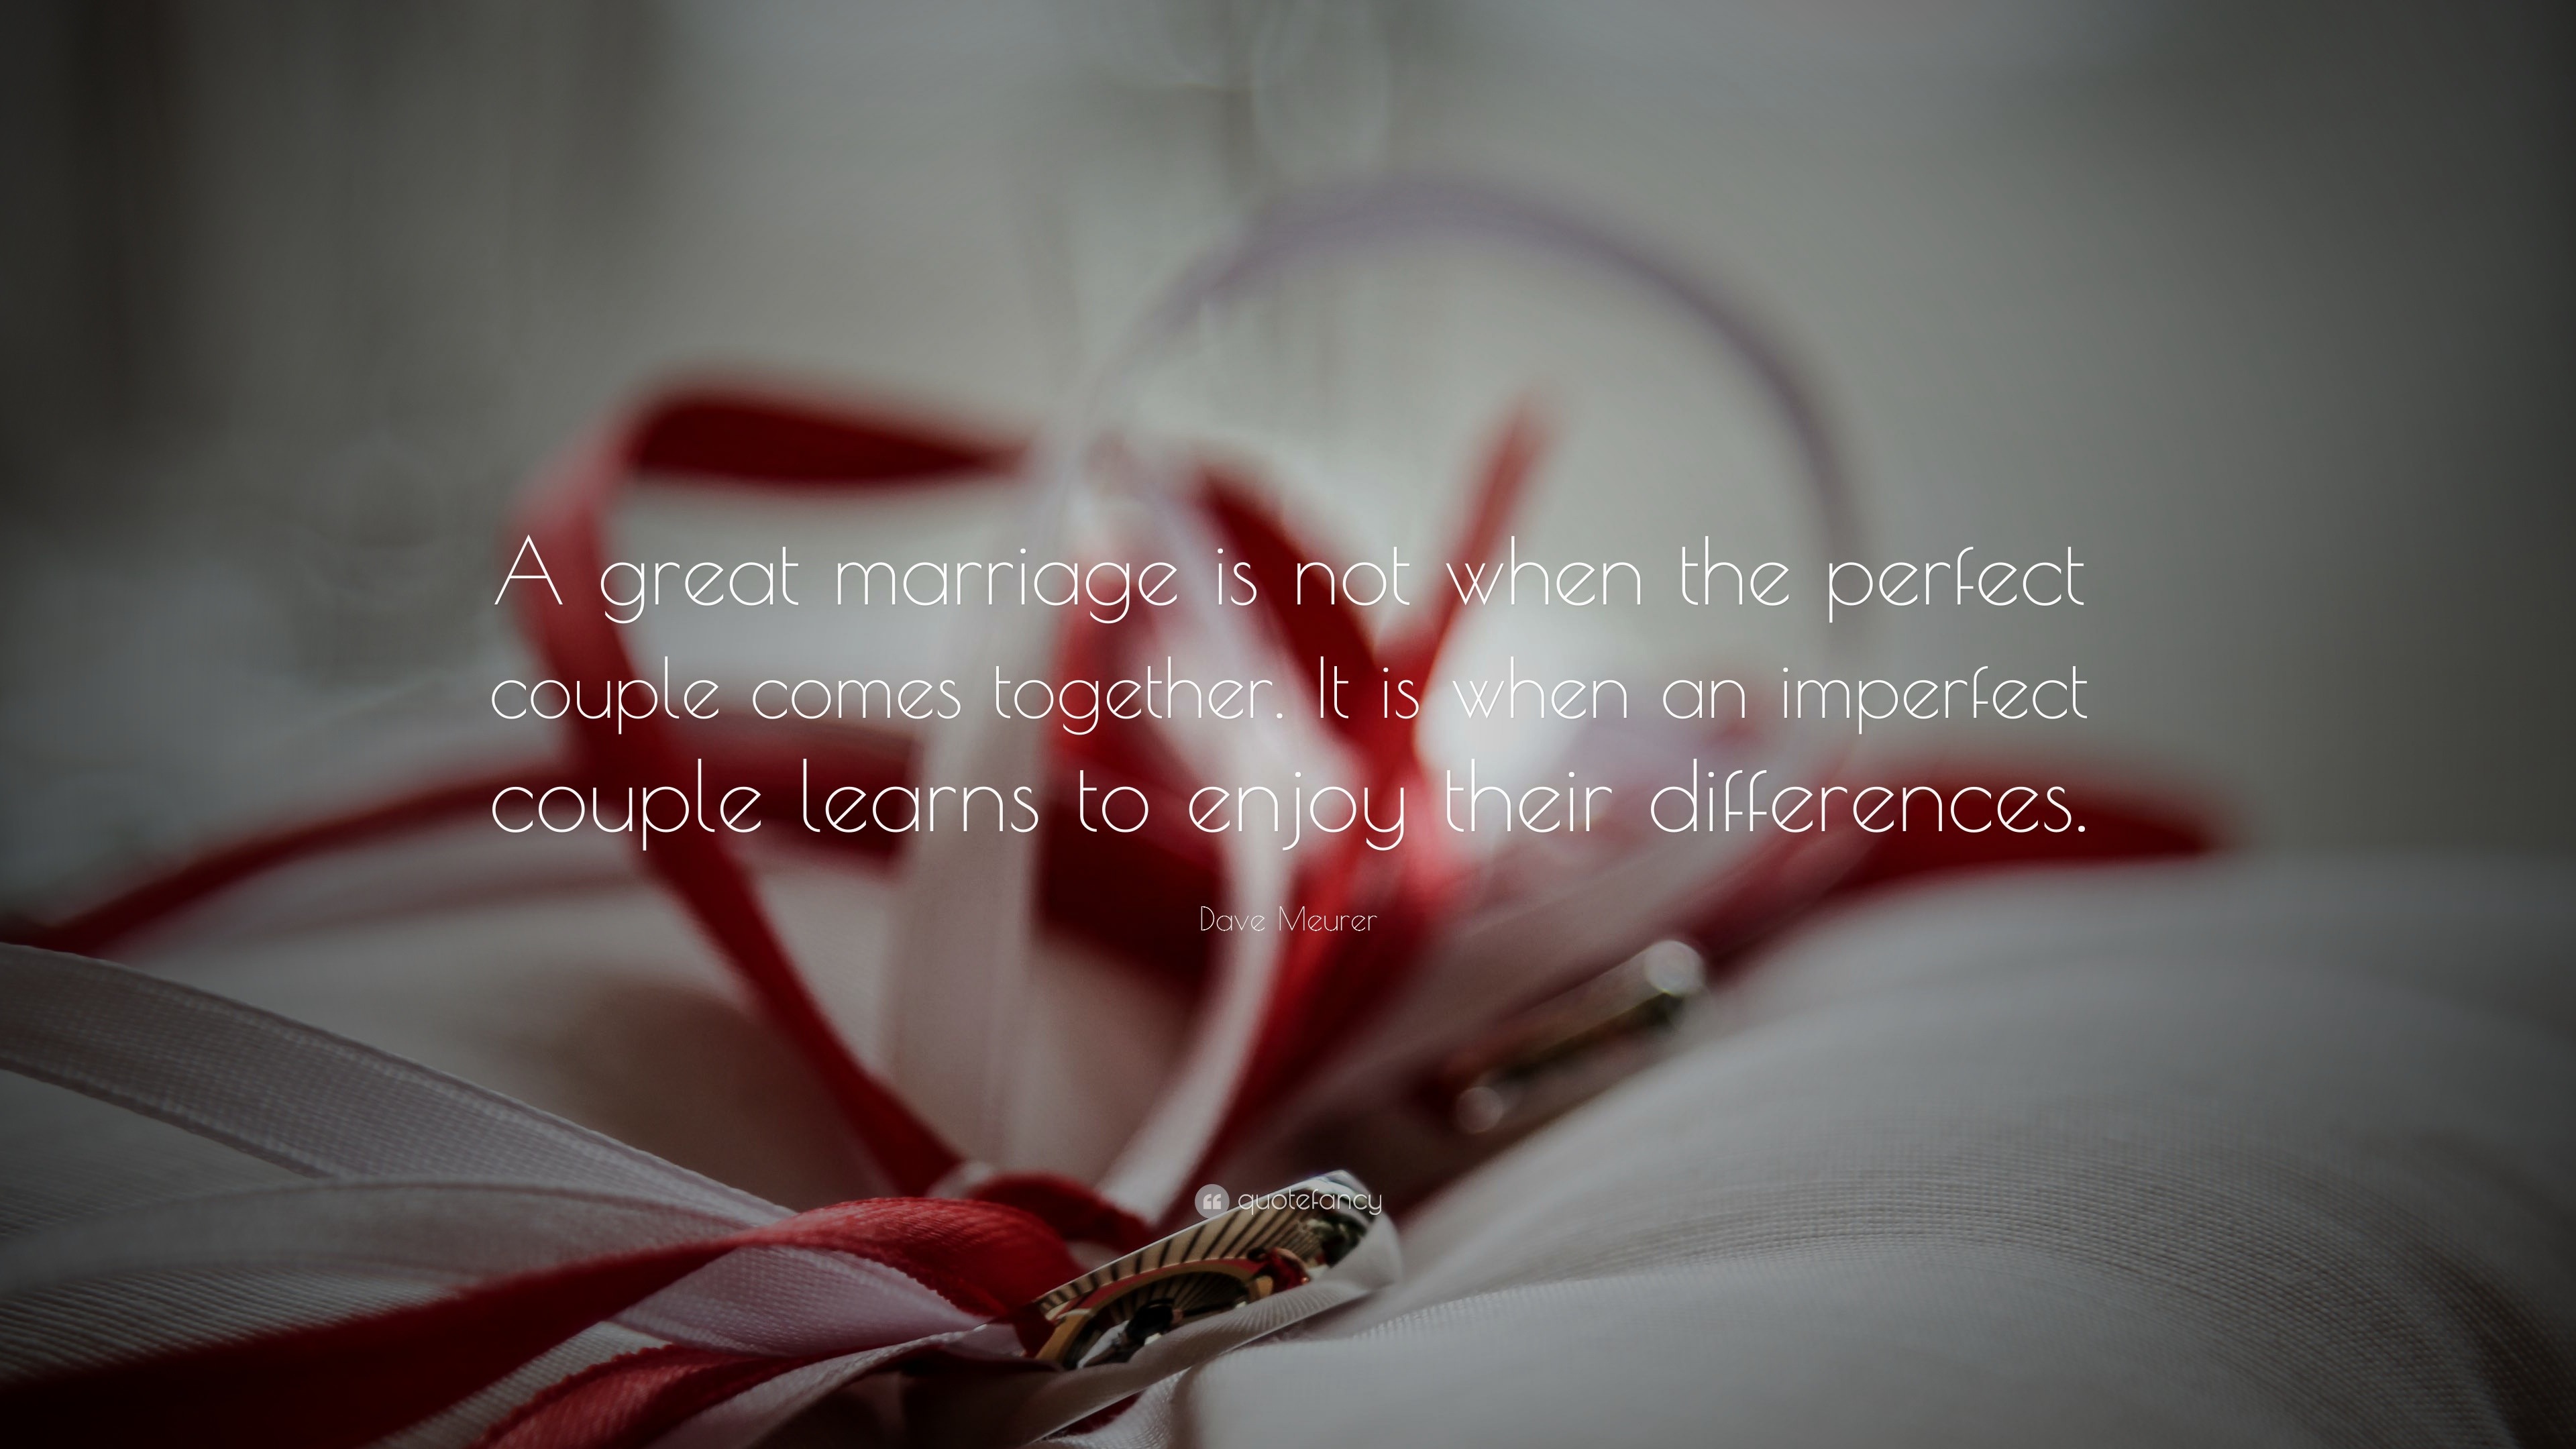 the perfect couple quotes